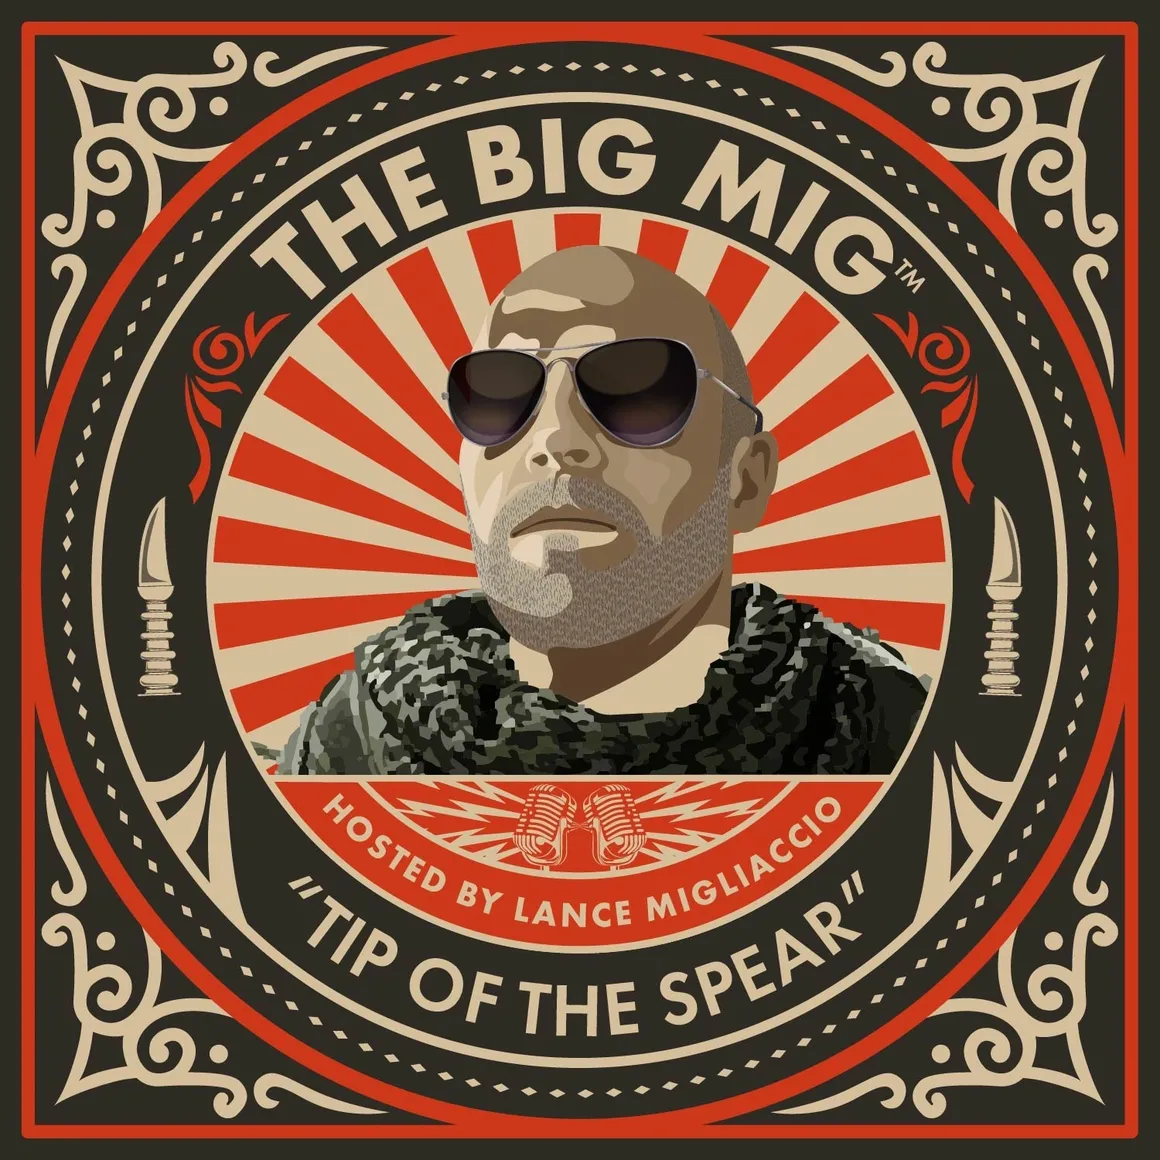 Finally, A Take No Prisoners Political Pro America First Podcast/Videocast ‘The Big Mig’ Hosted By Lance Migliaccio